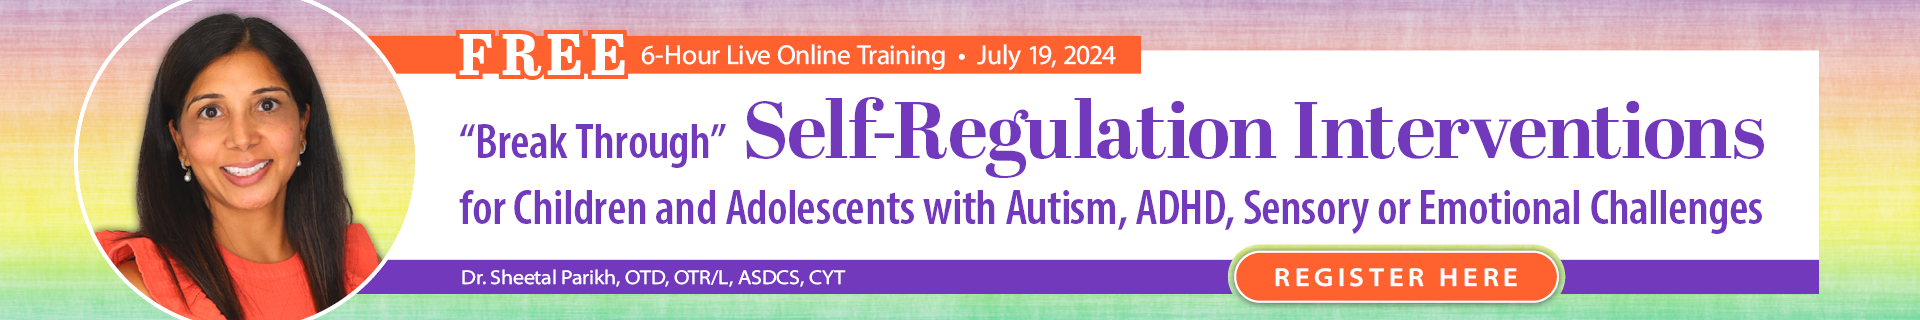 Break Through
                        Self-Regulation Interventions for Children and Adolescents with Autism, ADHD, Sensory or
                        Emotional Challenges